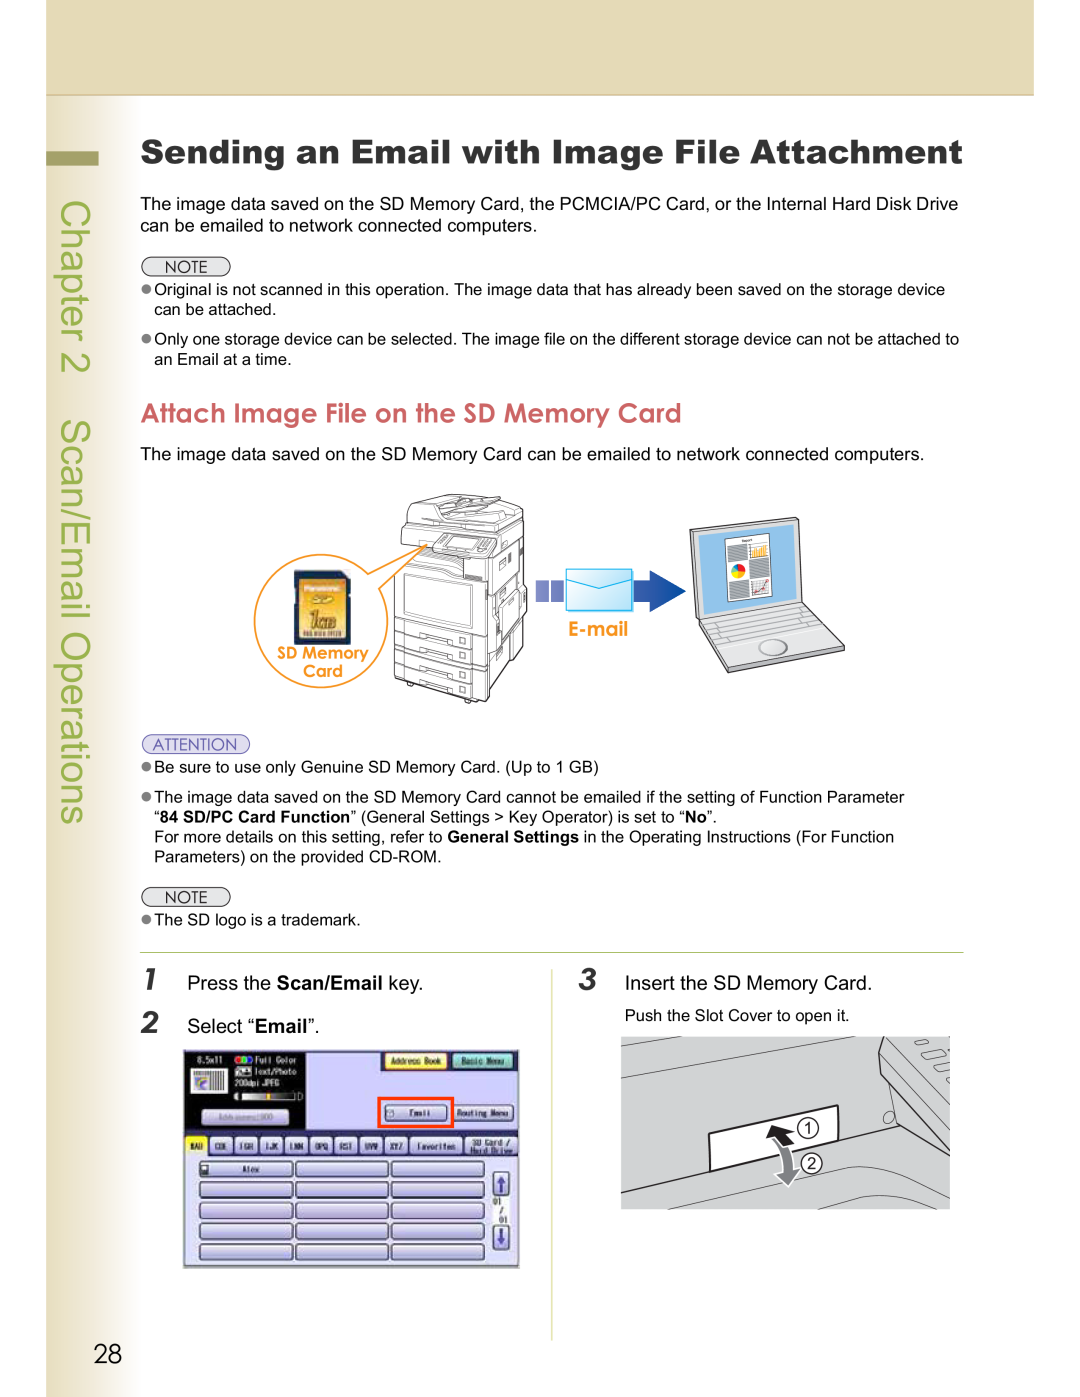 Panasonic DP-C323 Sending an Email with Image File Attachment, Attach Image File on the SD Memory Card, Select “Email” 